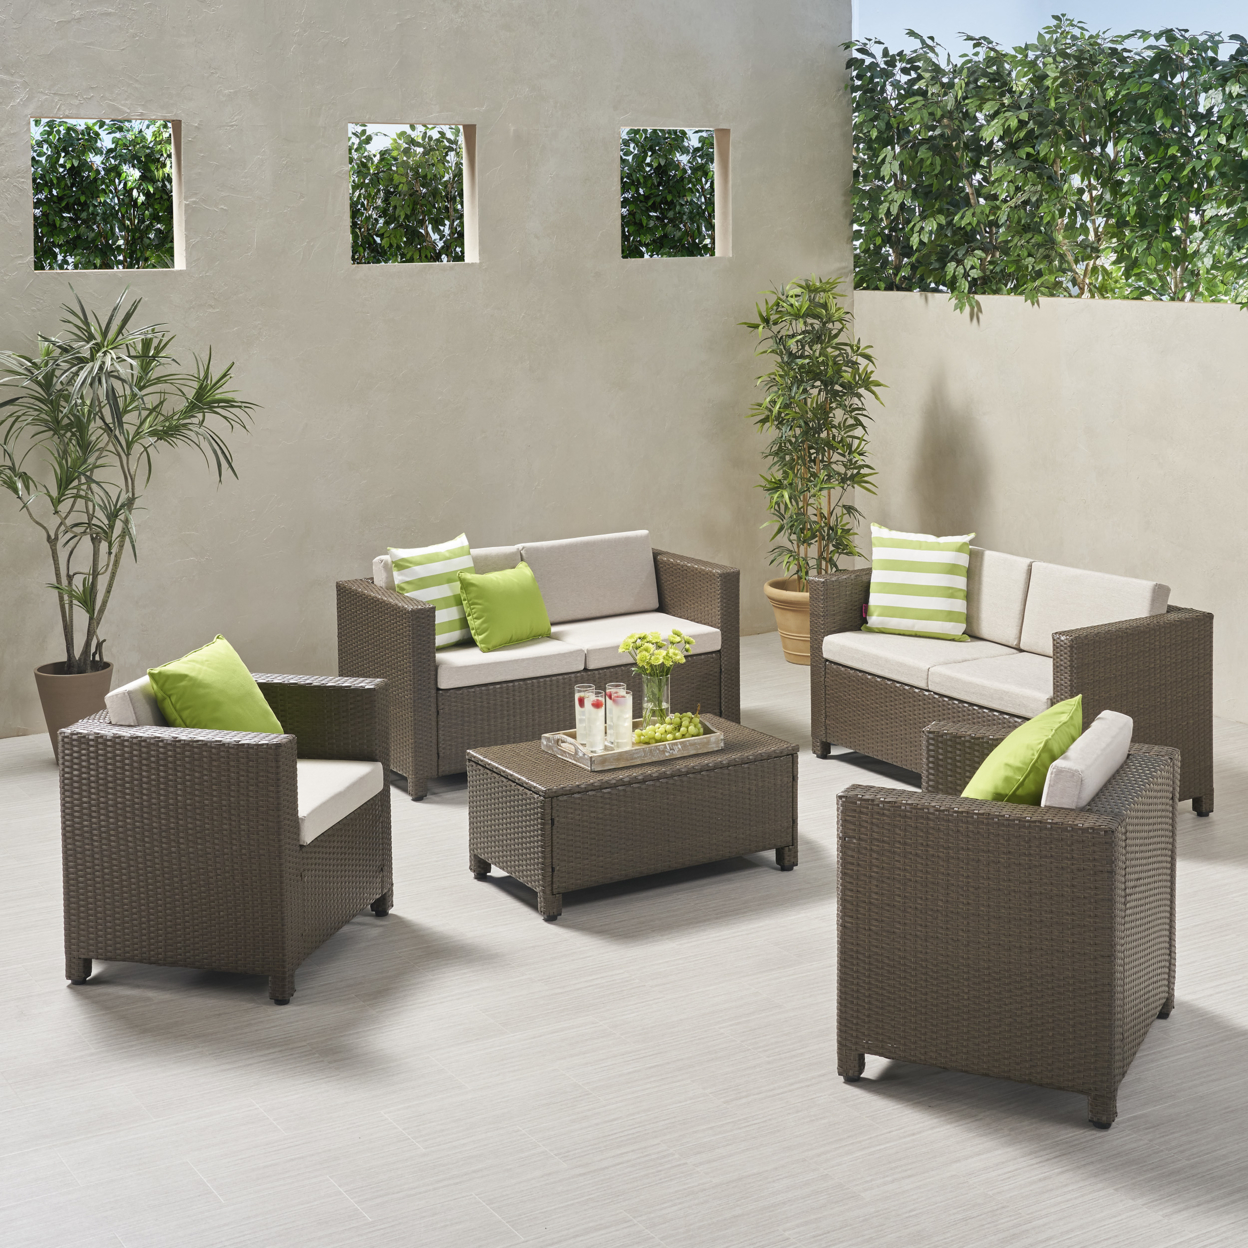 Doreen Outdoor 6 Seater Loveseat Chat Set With Cushions - Brown + Ceramic Gray